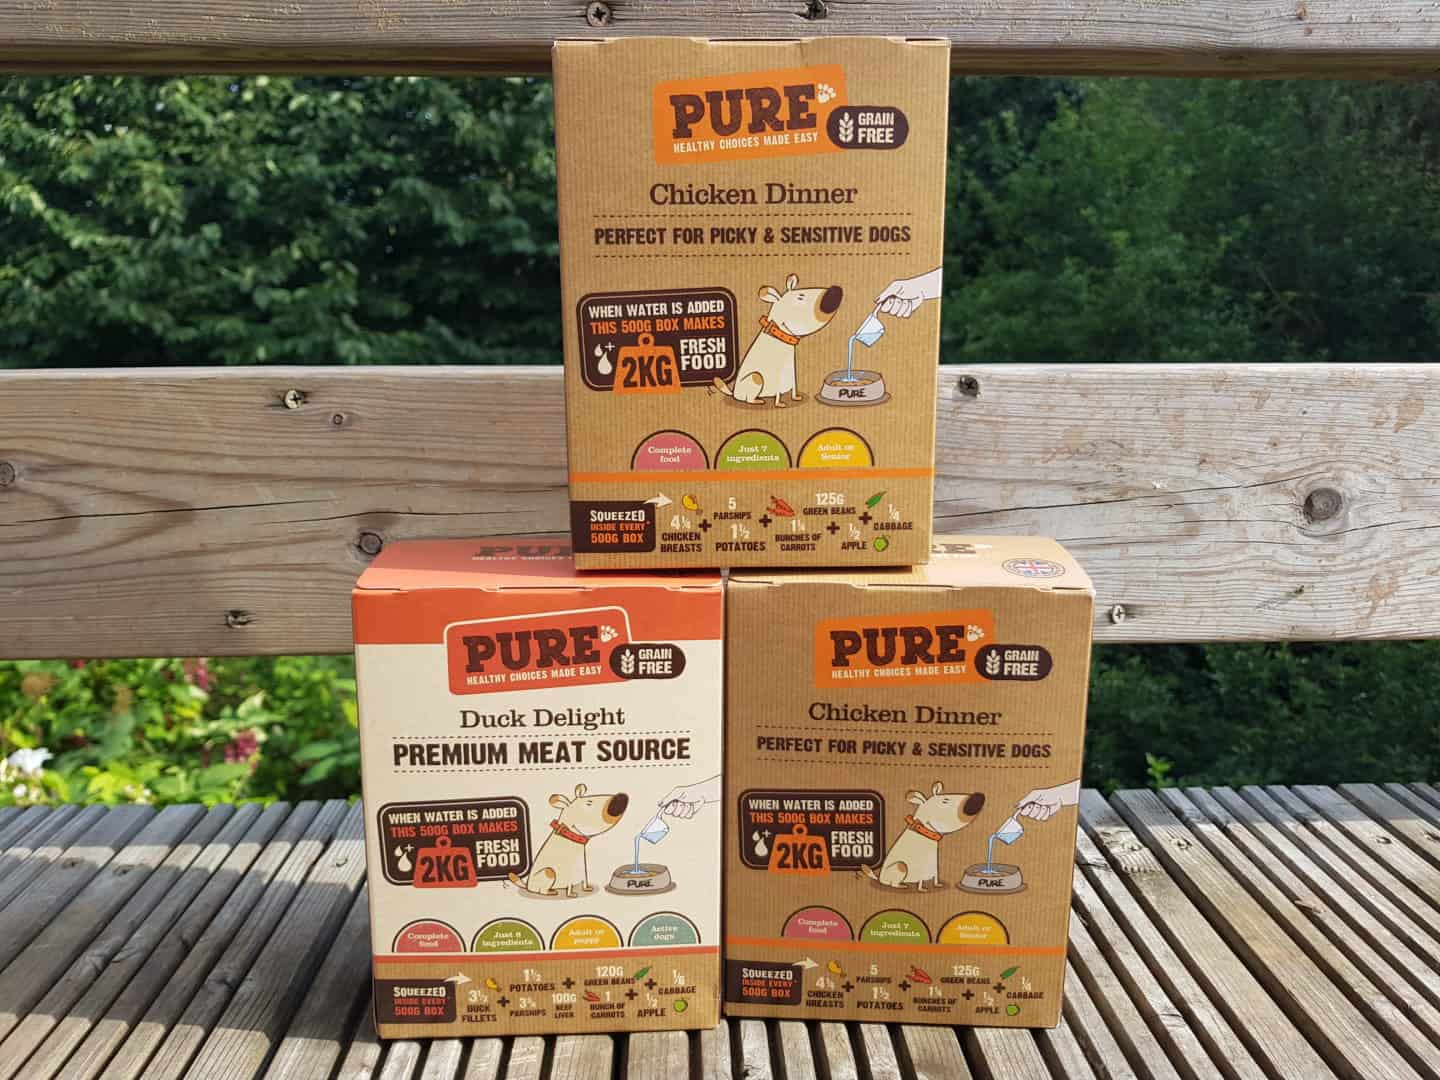 Three boxes of Pure dog food